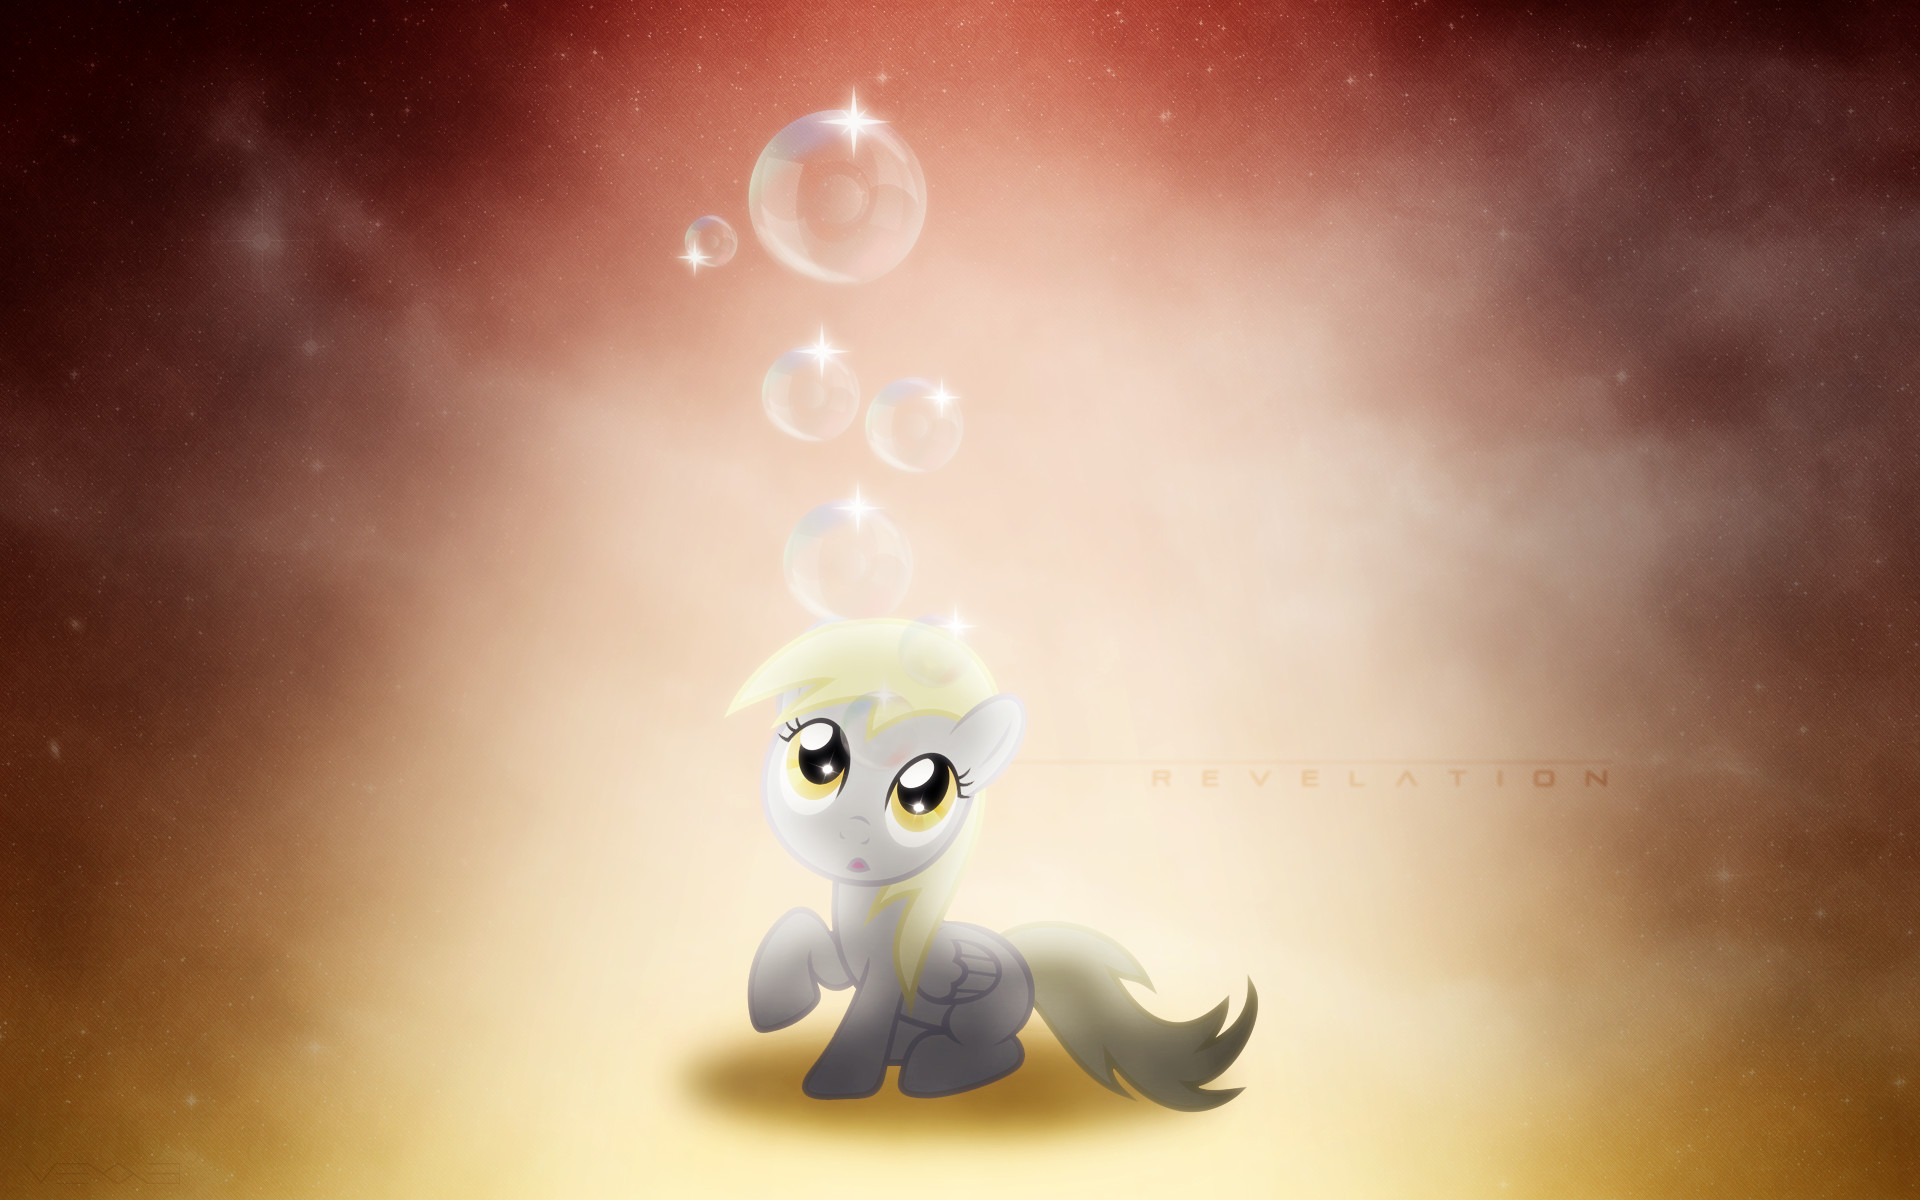 1920x1200 Friendship Derpy Hooves Dinky Little Pony Magic Pegasus Ponies Wings # wallpapers #widescreen #backgrounds